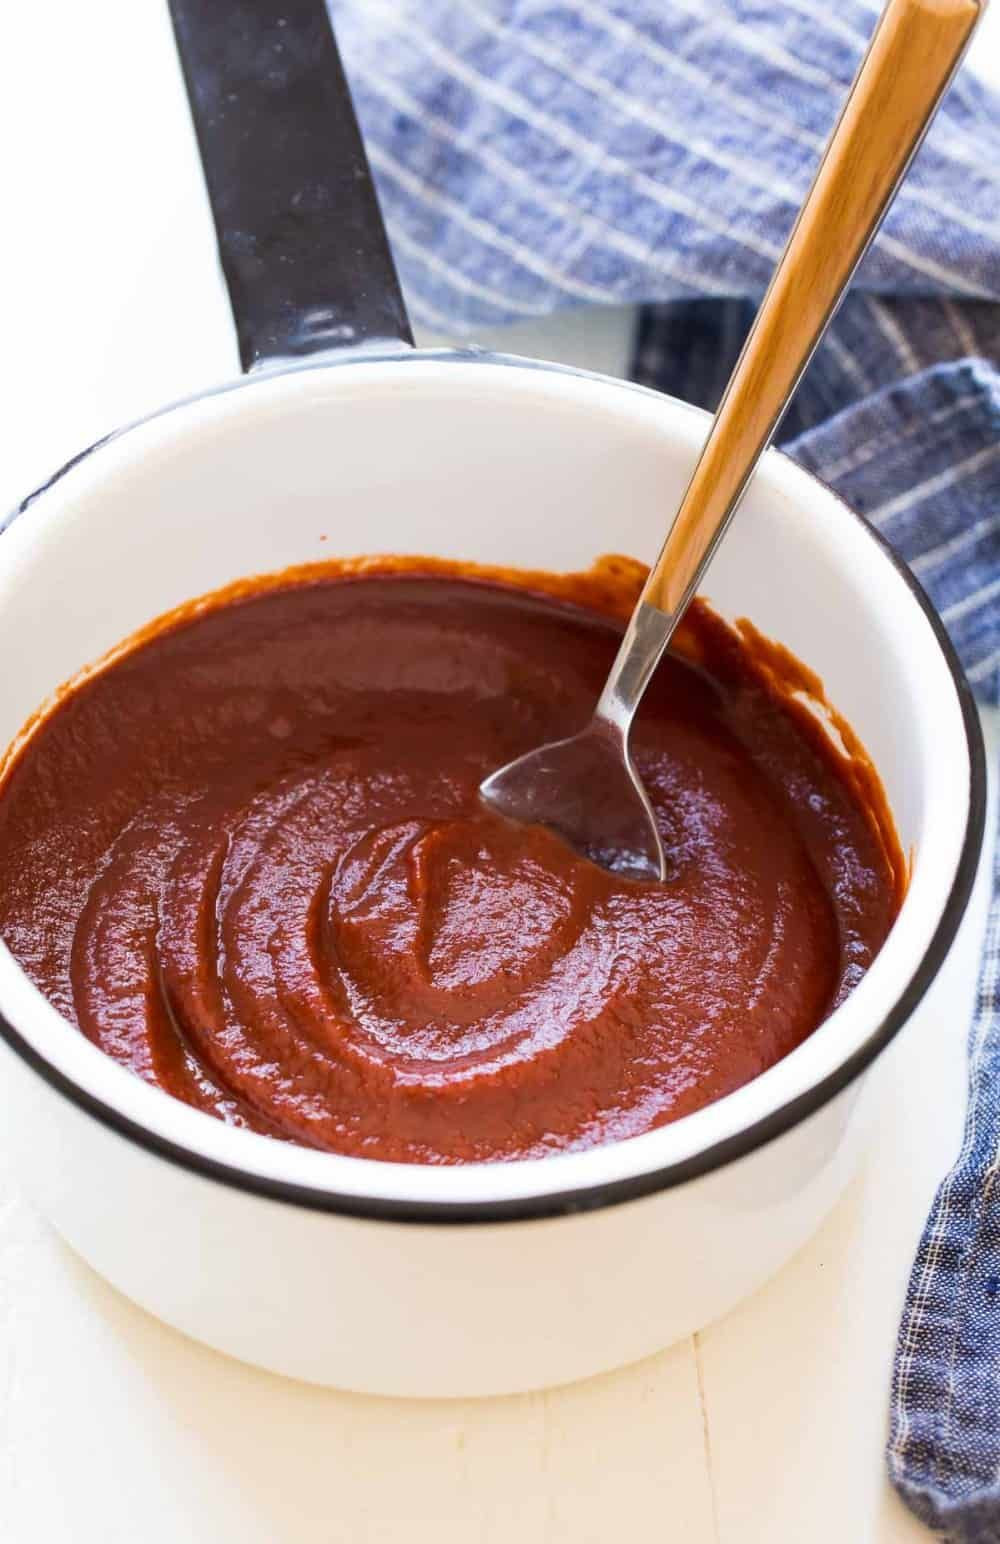 Bbq Sauce From Scratch No Ketchup Elegant How to Make the Best Homemade Barbecue Sauce This Easy